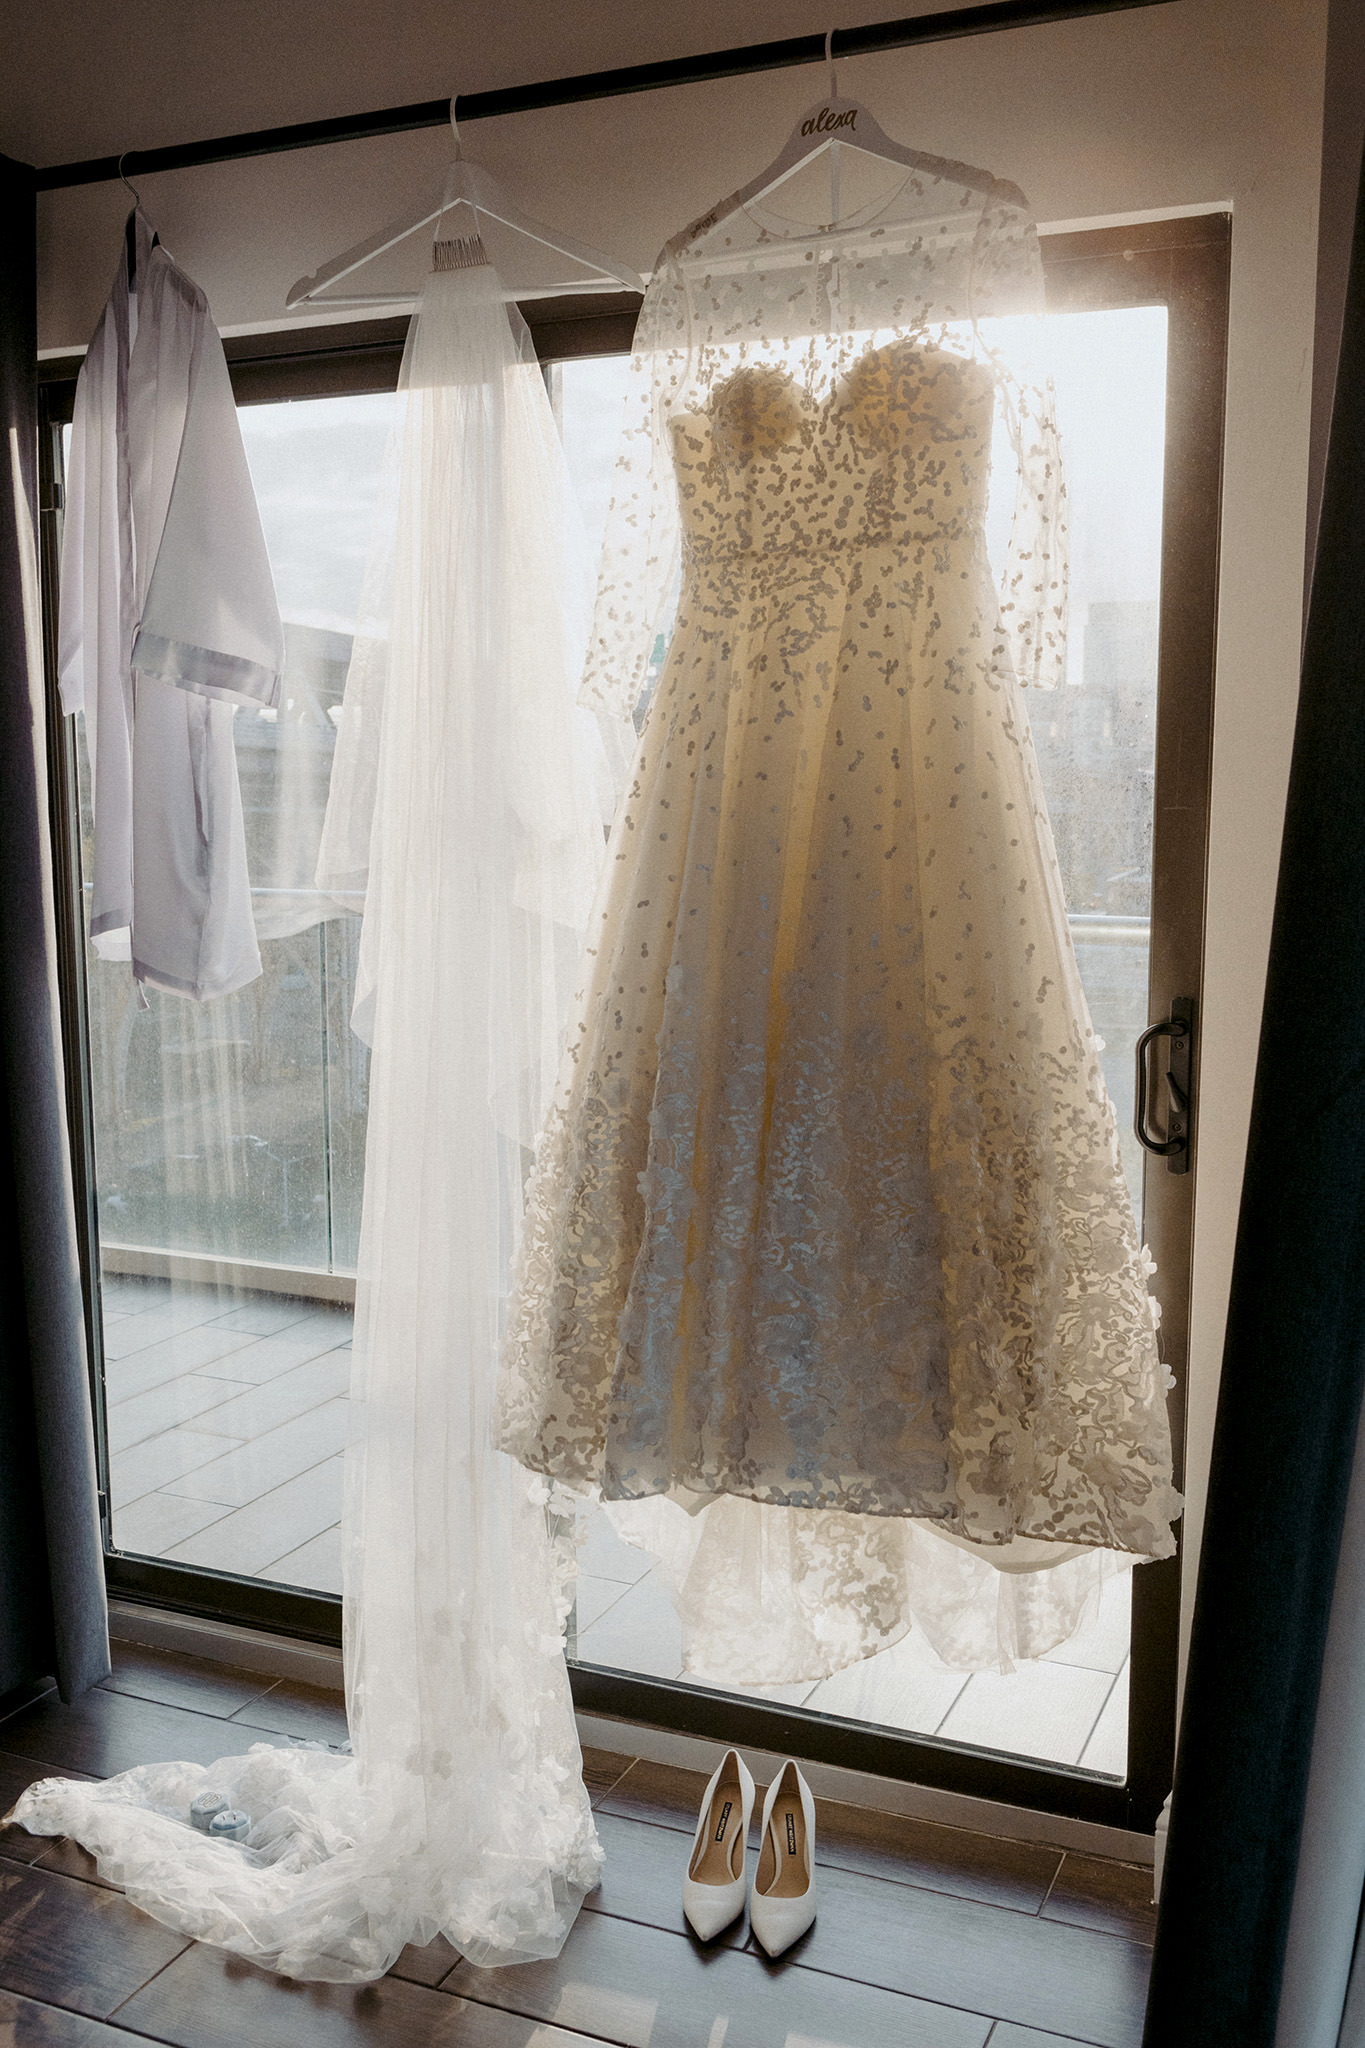 Brides wedding dress hanging in the window at the Ravel Hotel